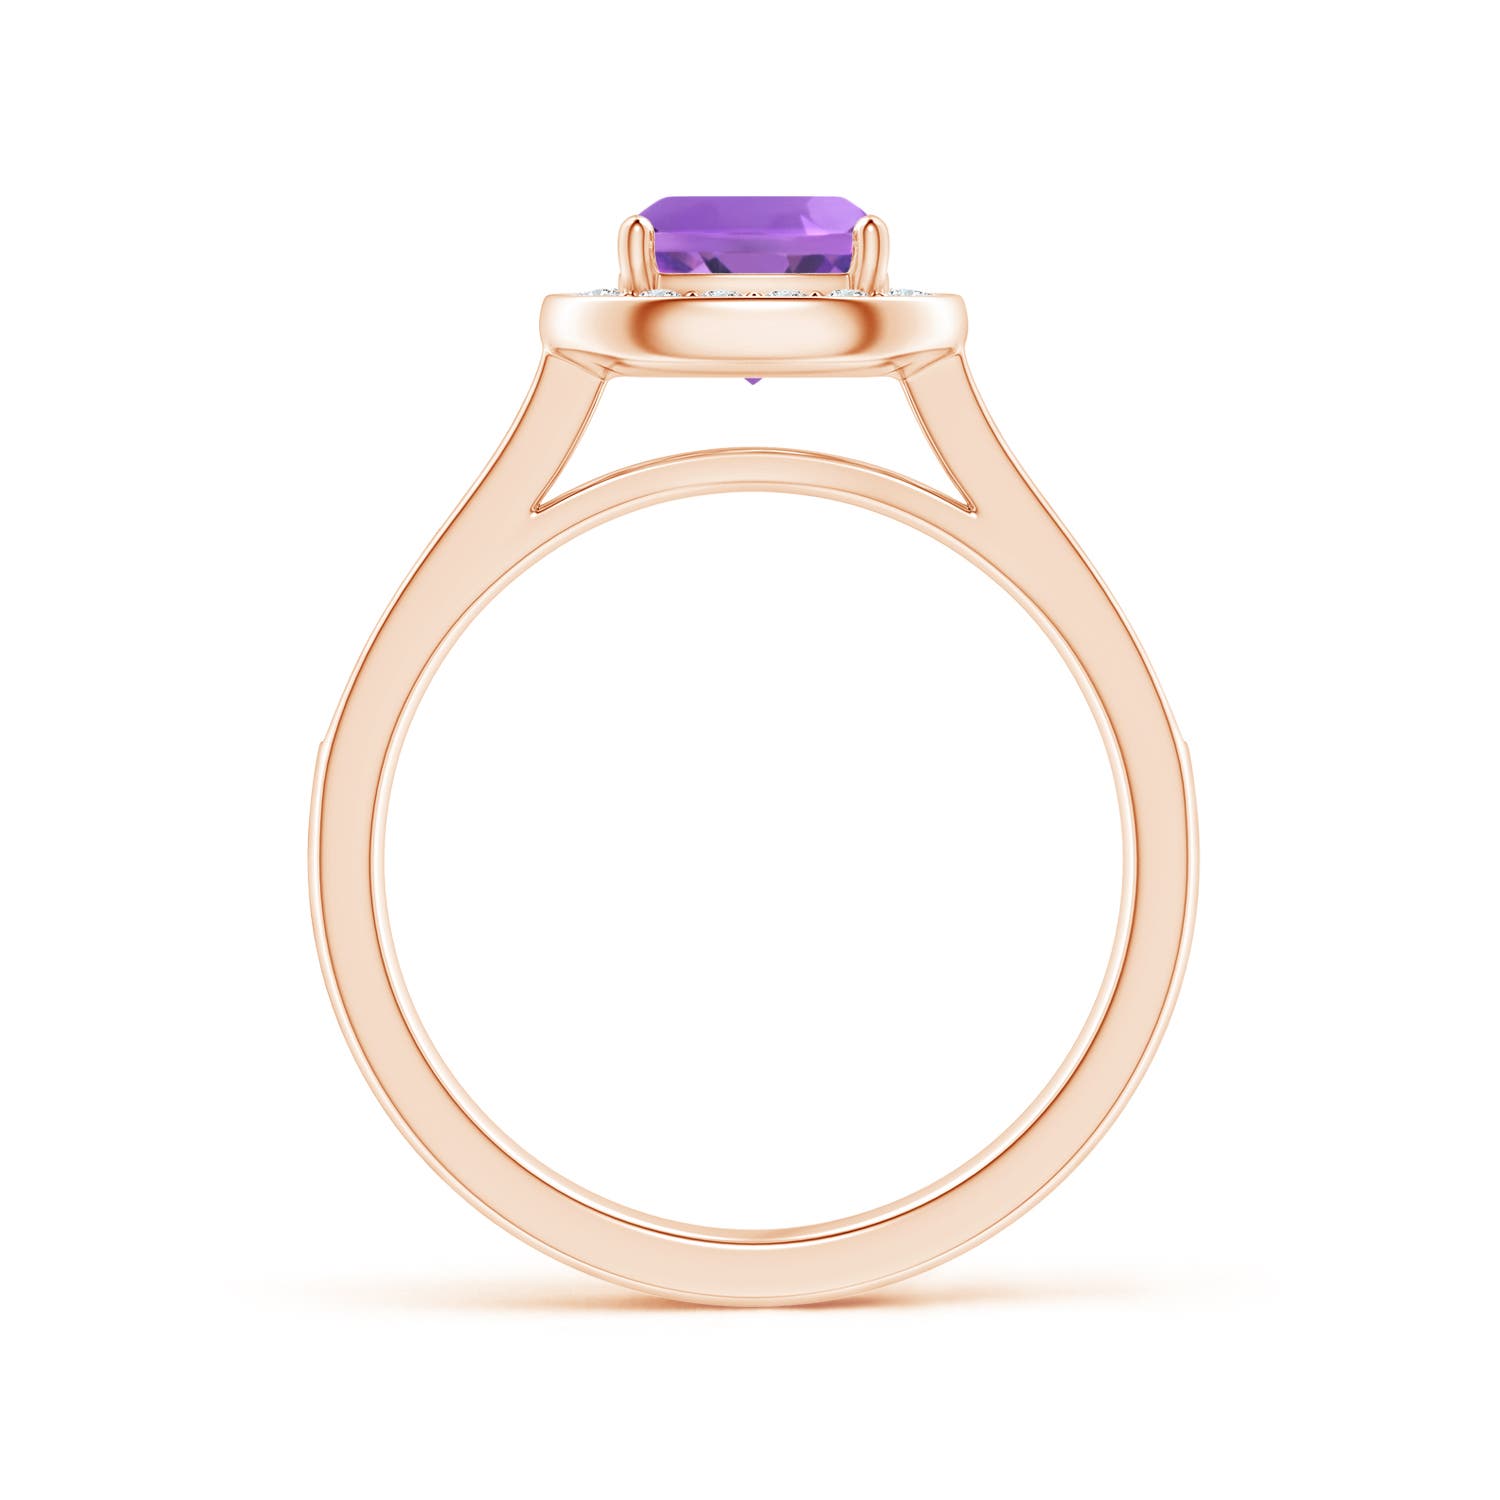 AA - Amethyst / 1.08 CT / 14 KT Rose Gold